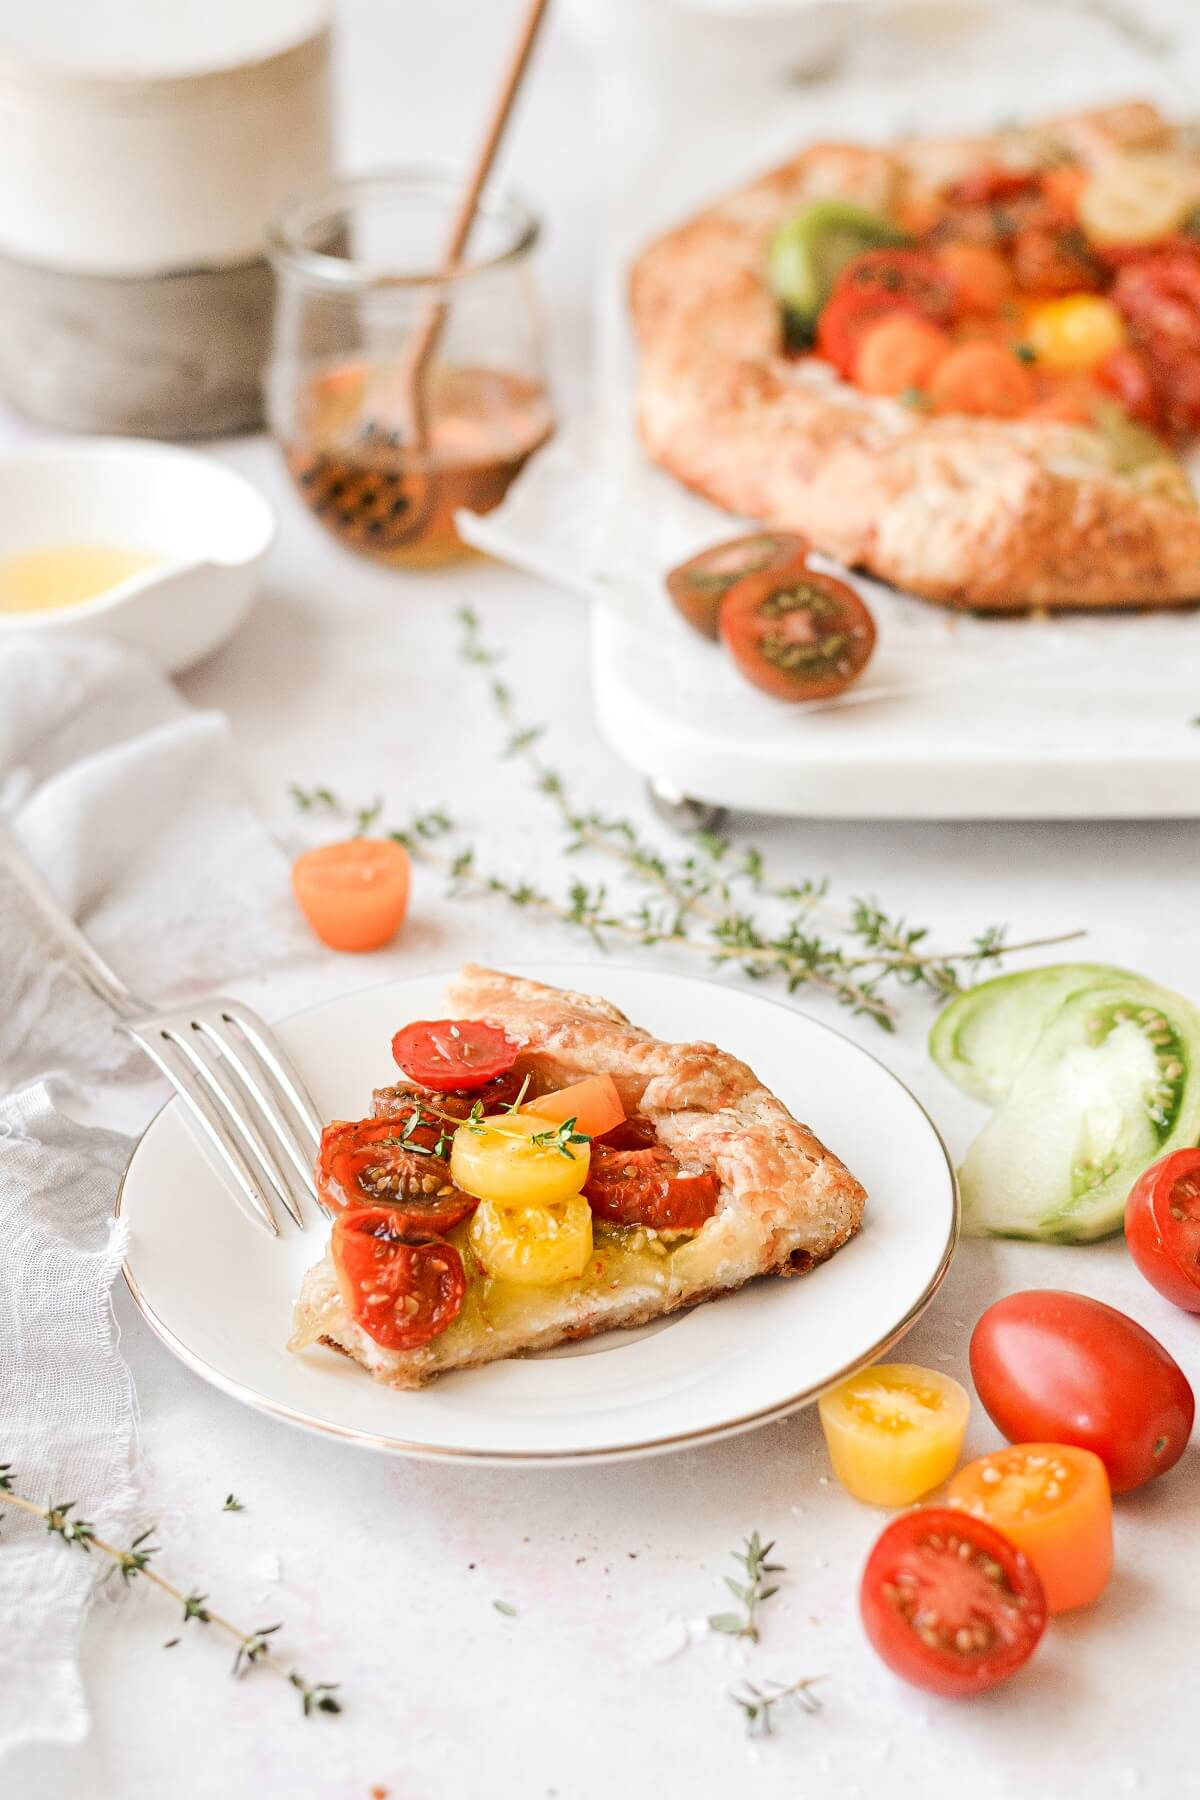 A slice of tomato galette on a white plate.